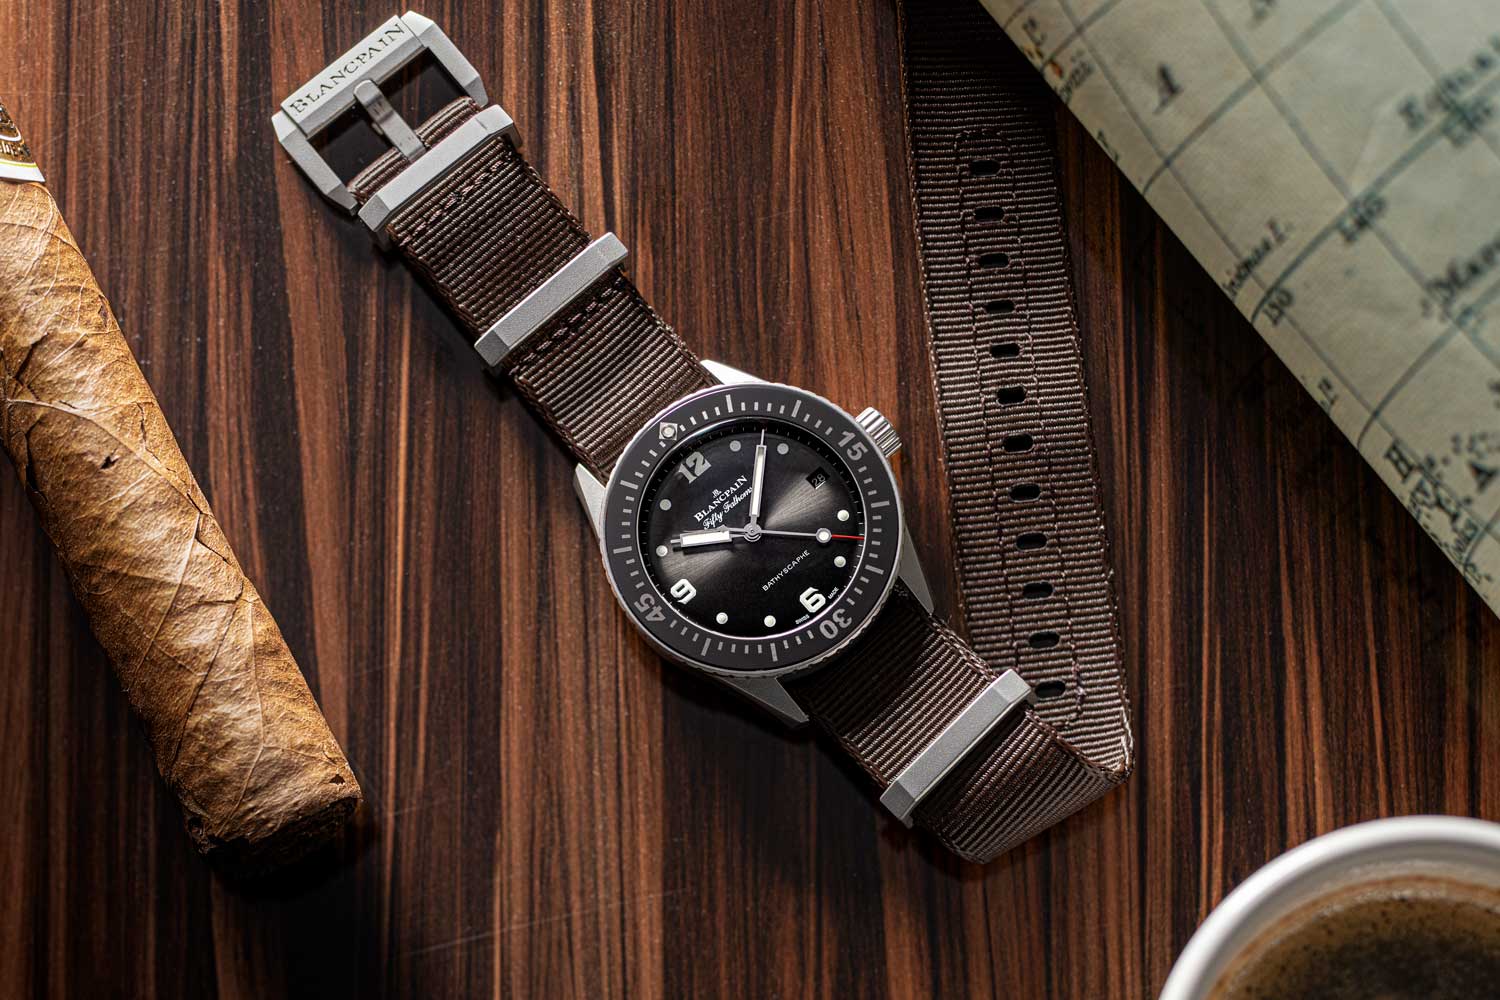 Marc Hayek, who played an instrumental role in designing this watch, also presented this piece to his son as his first diving watch.